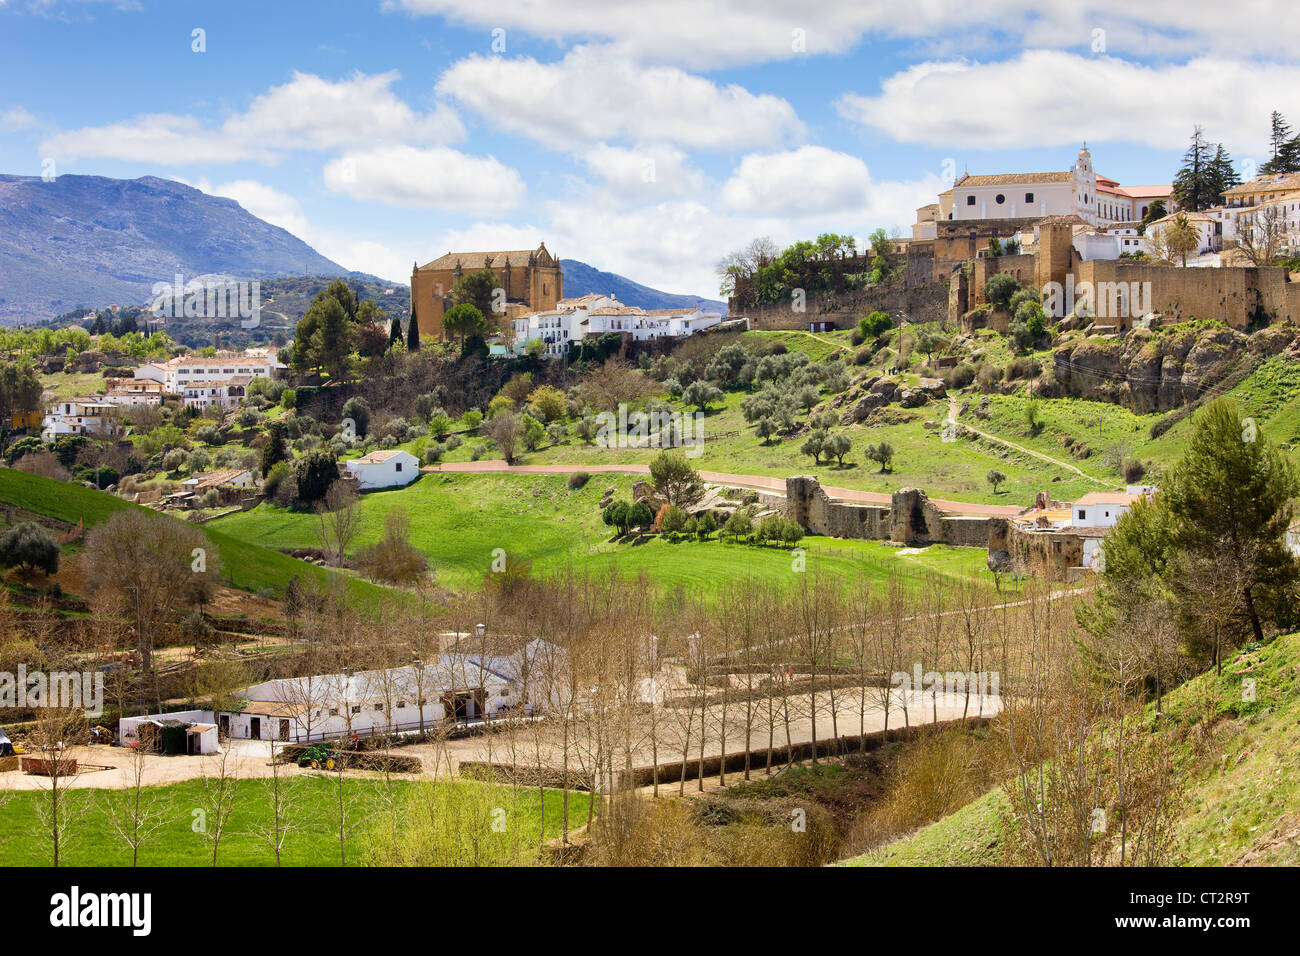 Scenic Andalusia landscape, old town of Ronda on a green hills, stud farm in a valley, southern Spain, Malaga province. Stock Photo